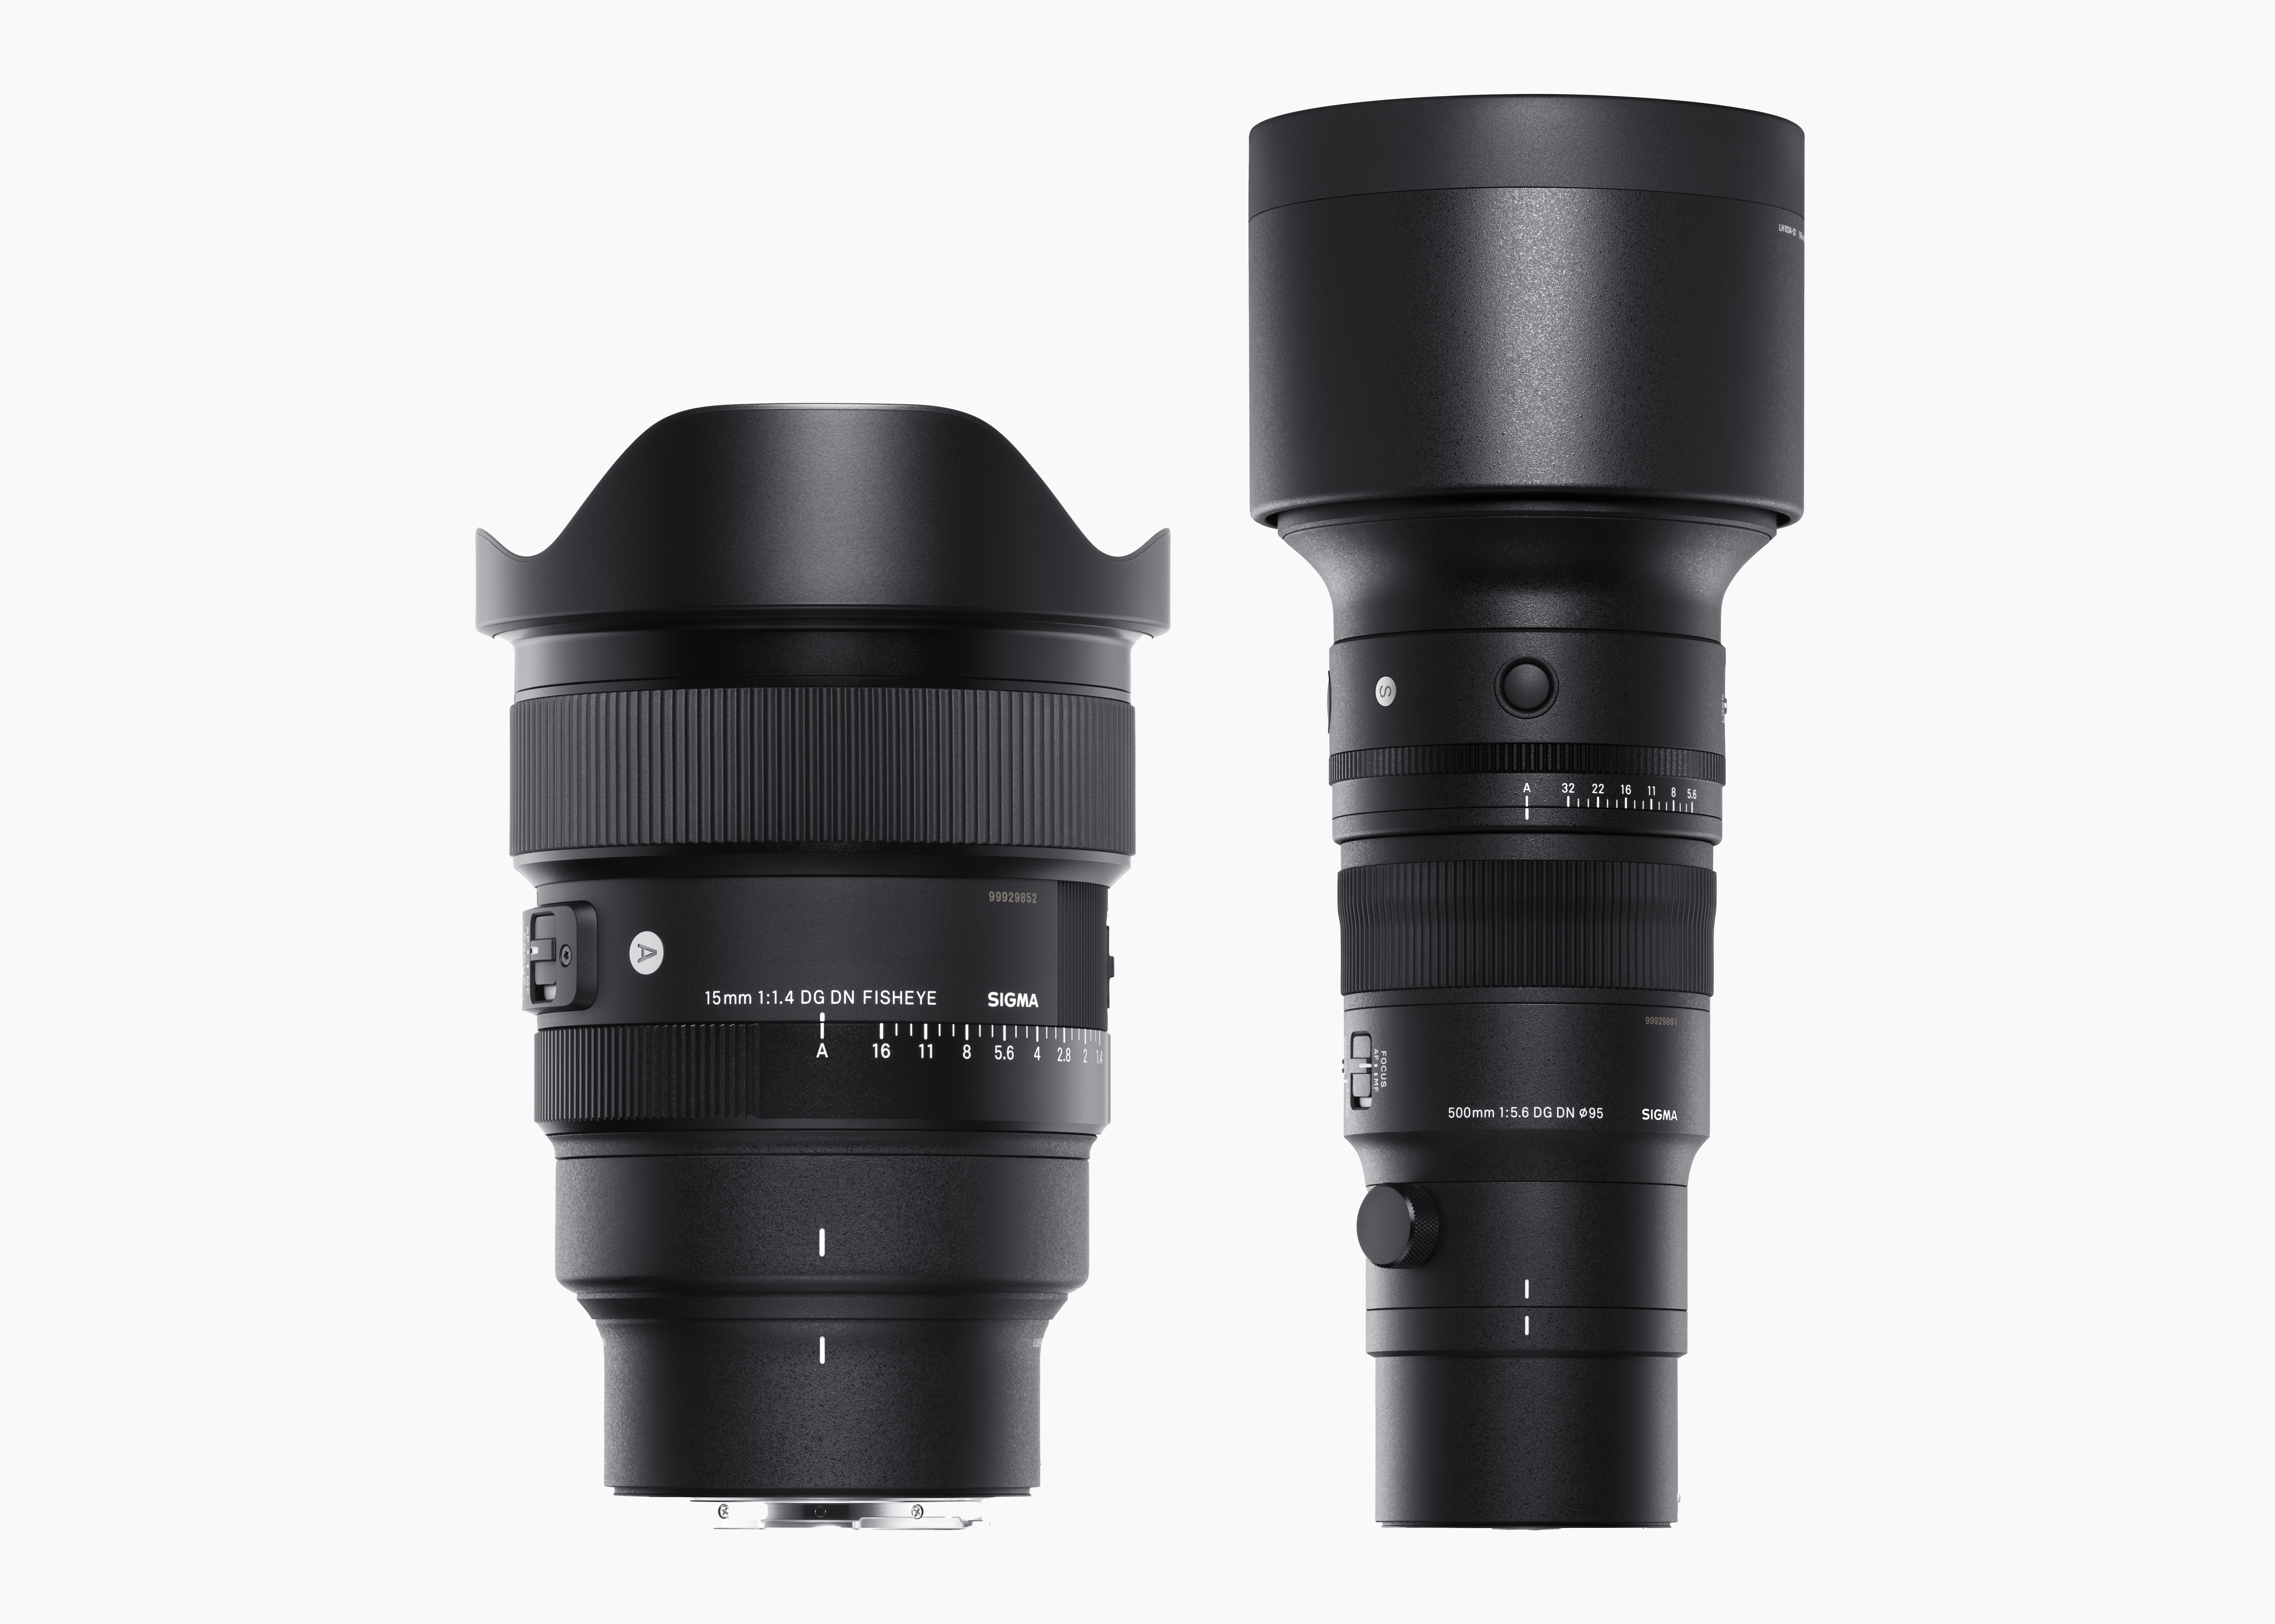 NEW SIGMA 15mm F1.4 DG DN and SIGMA 500mm F5.6 18